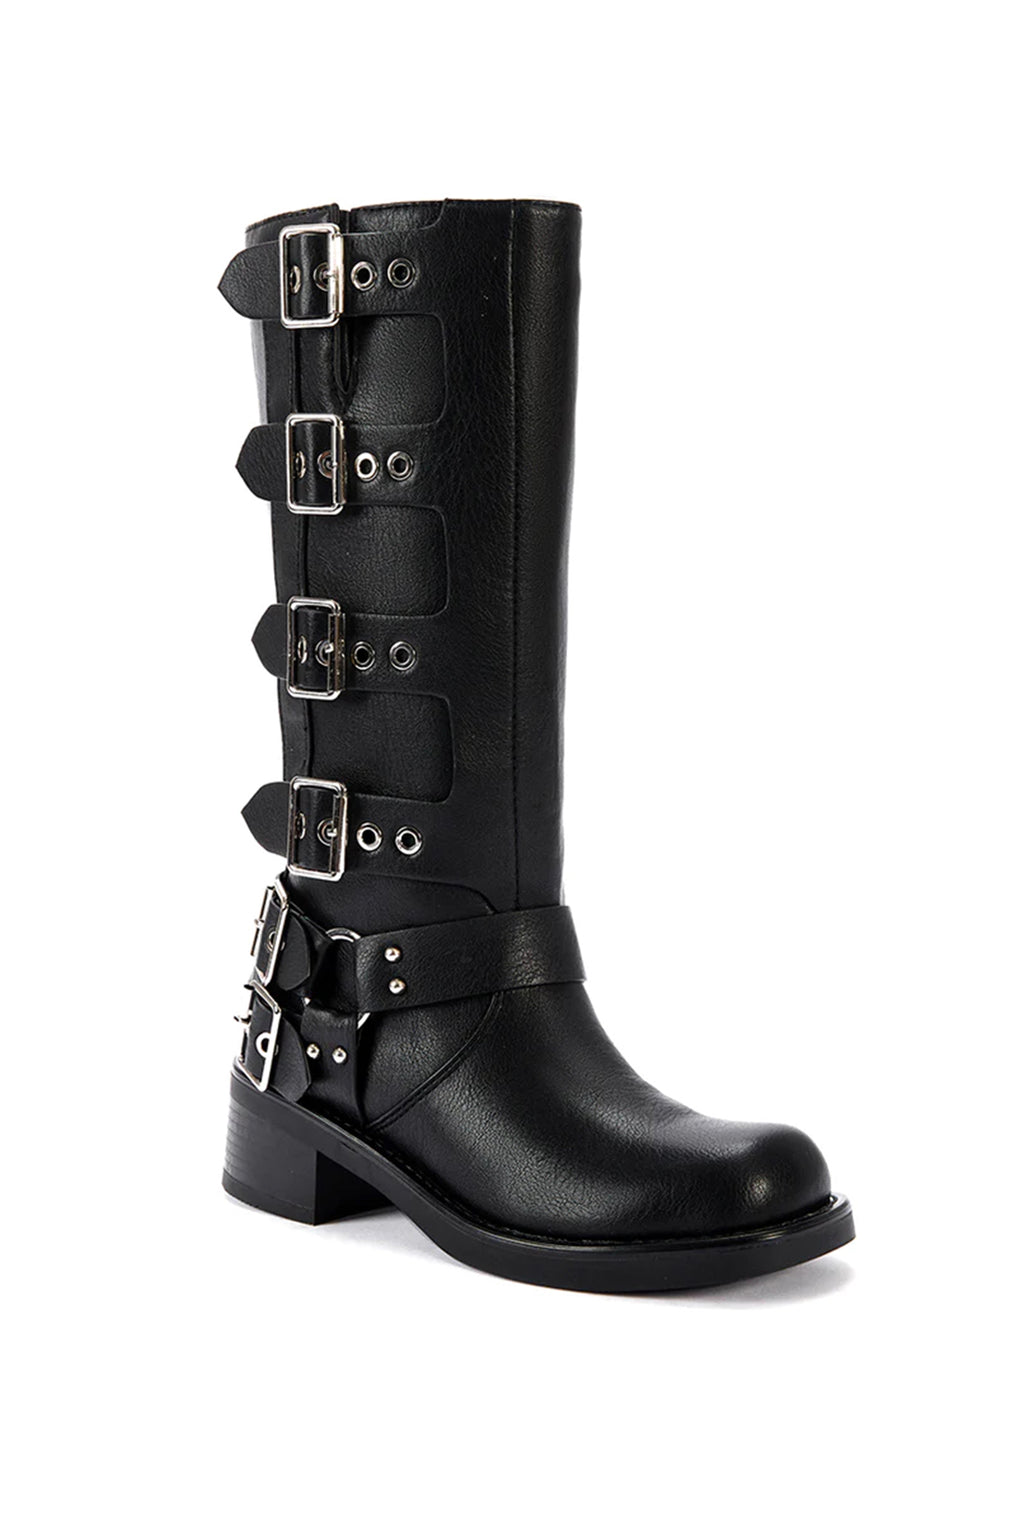 Buckled Up Black Boot